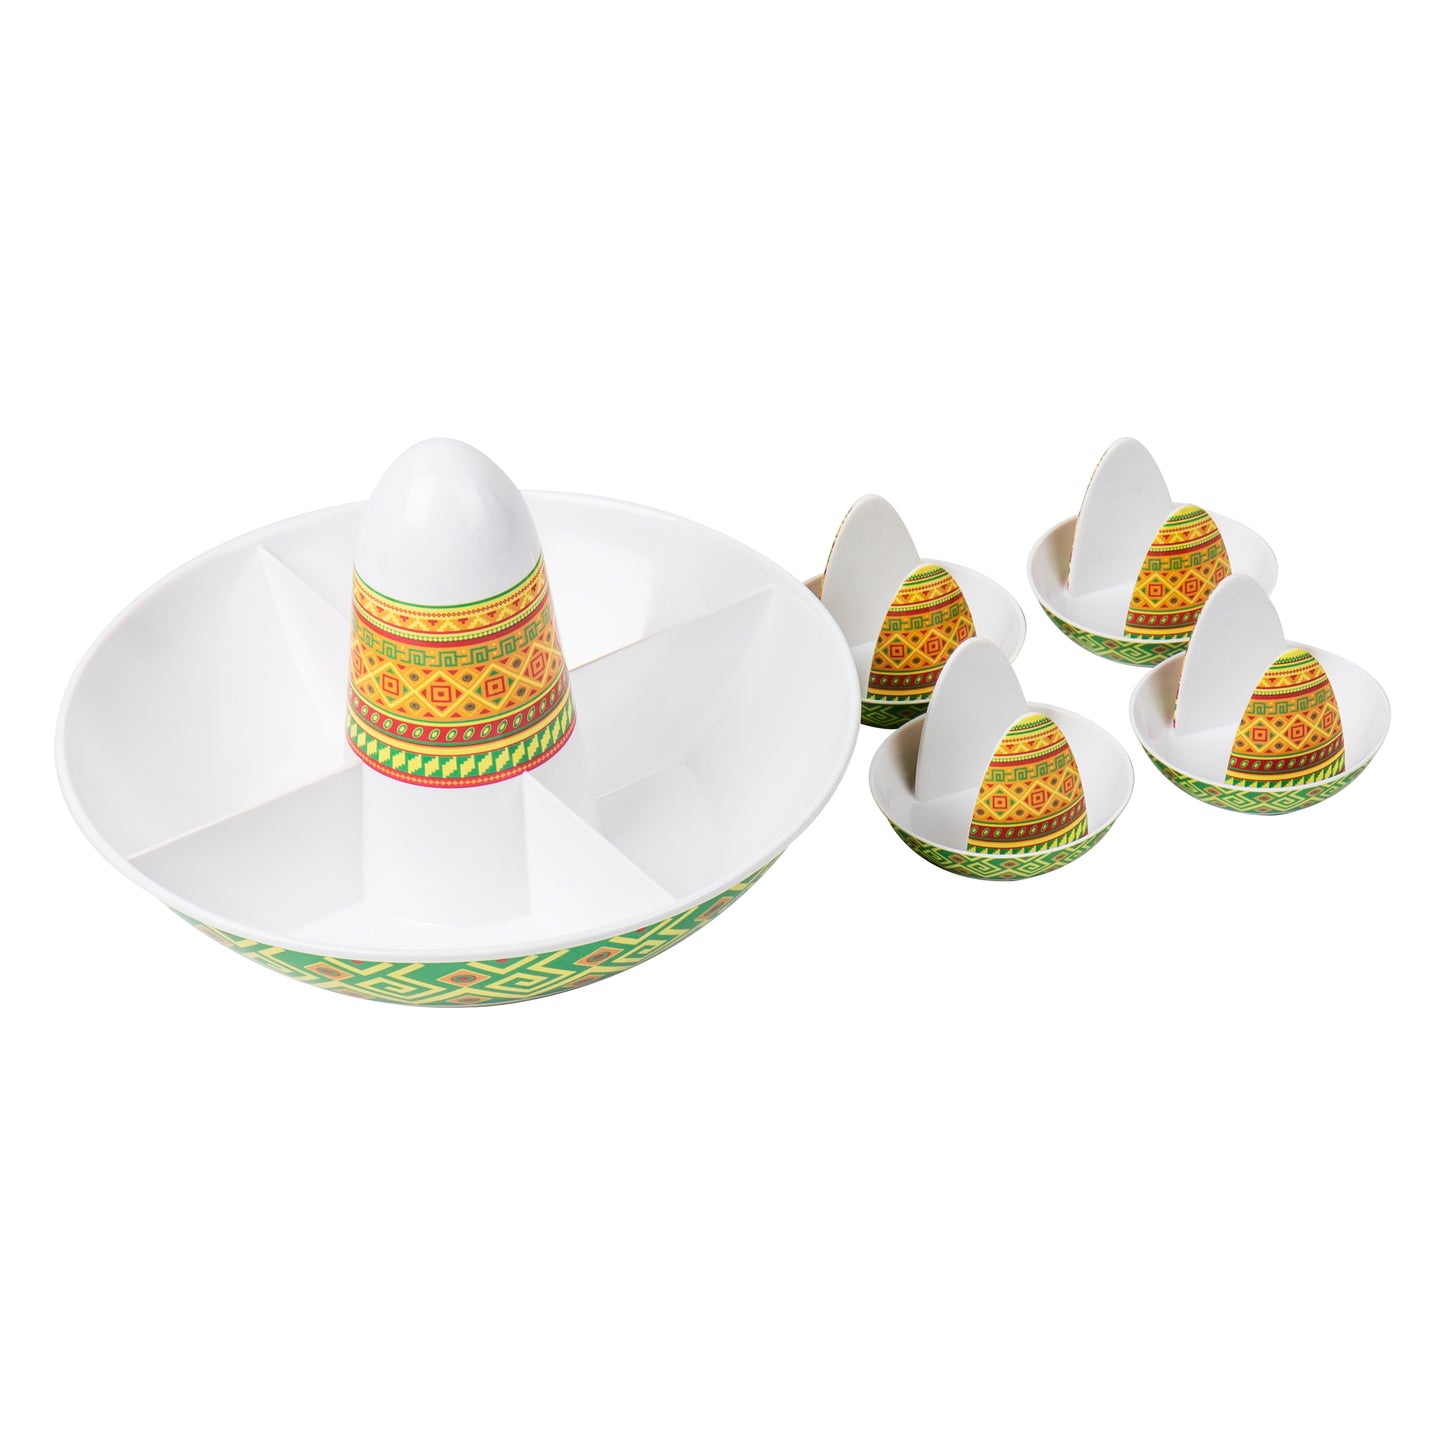 Mind Reader Taco Holders and Divided Serving Carousel Set, Taco Tuesday, Melamine, 12.5"Lx 12.5"W x 8.25"H, 5 pcs, White